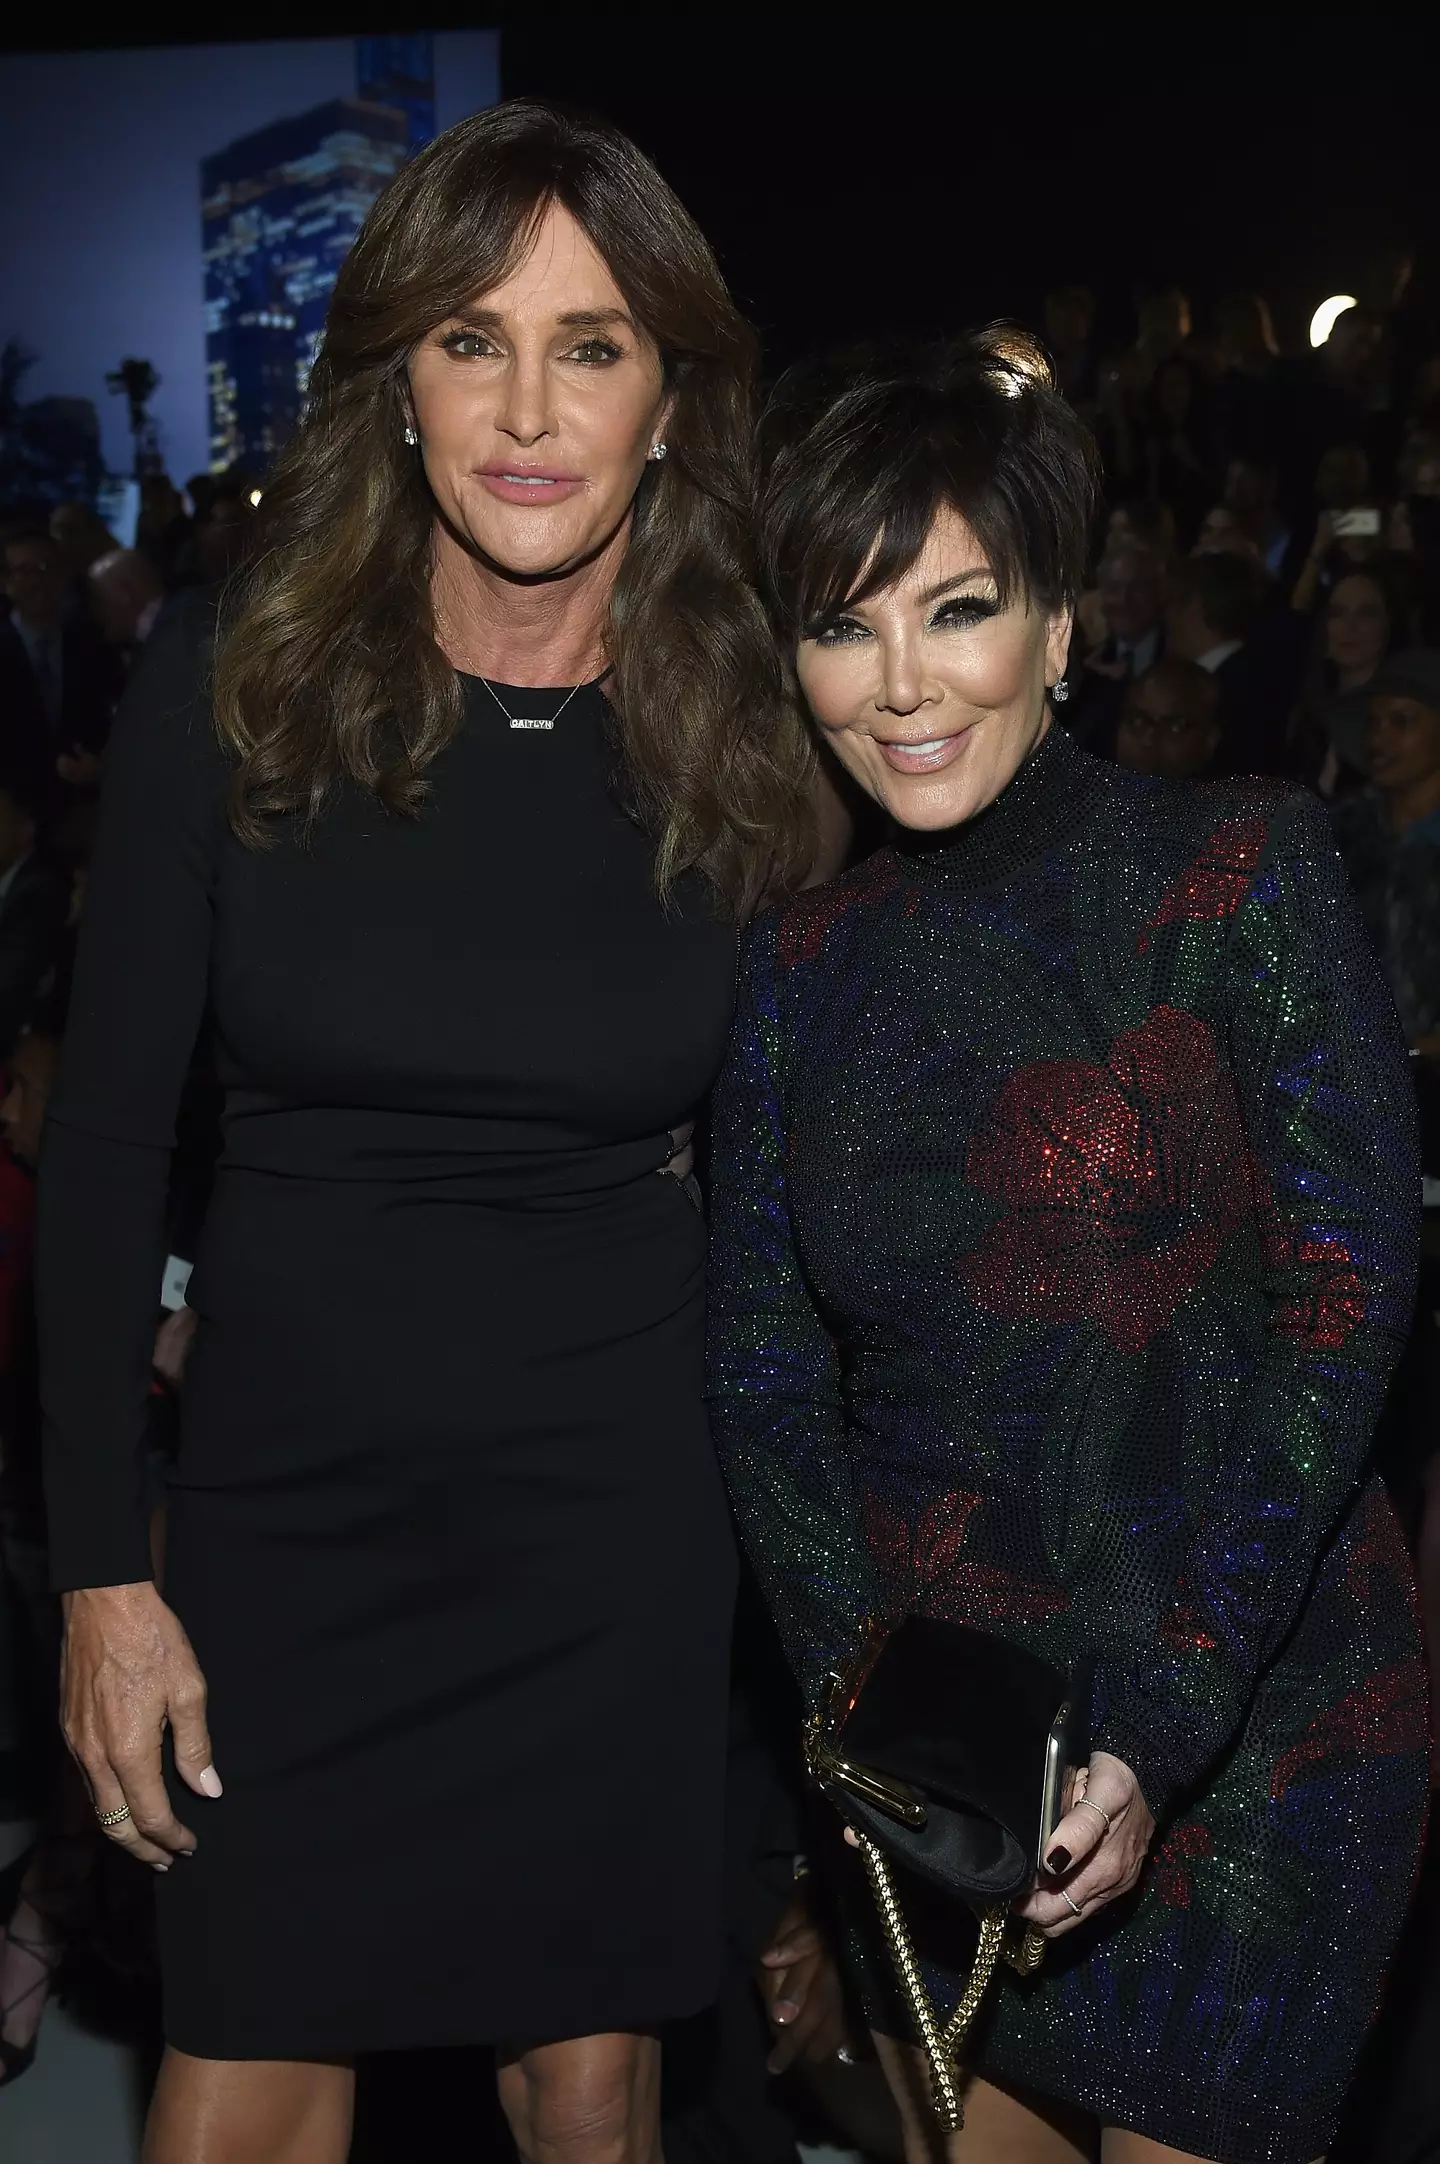 Kris and Caitlyn were married for 22 years.